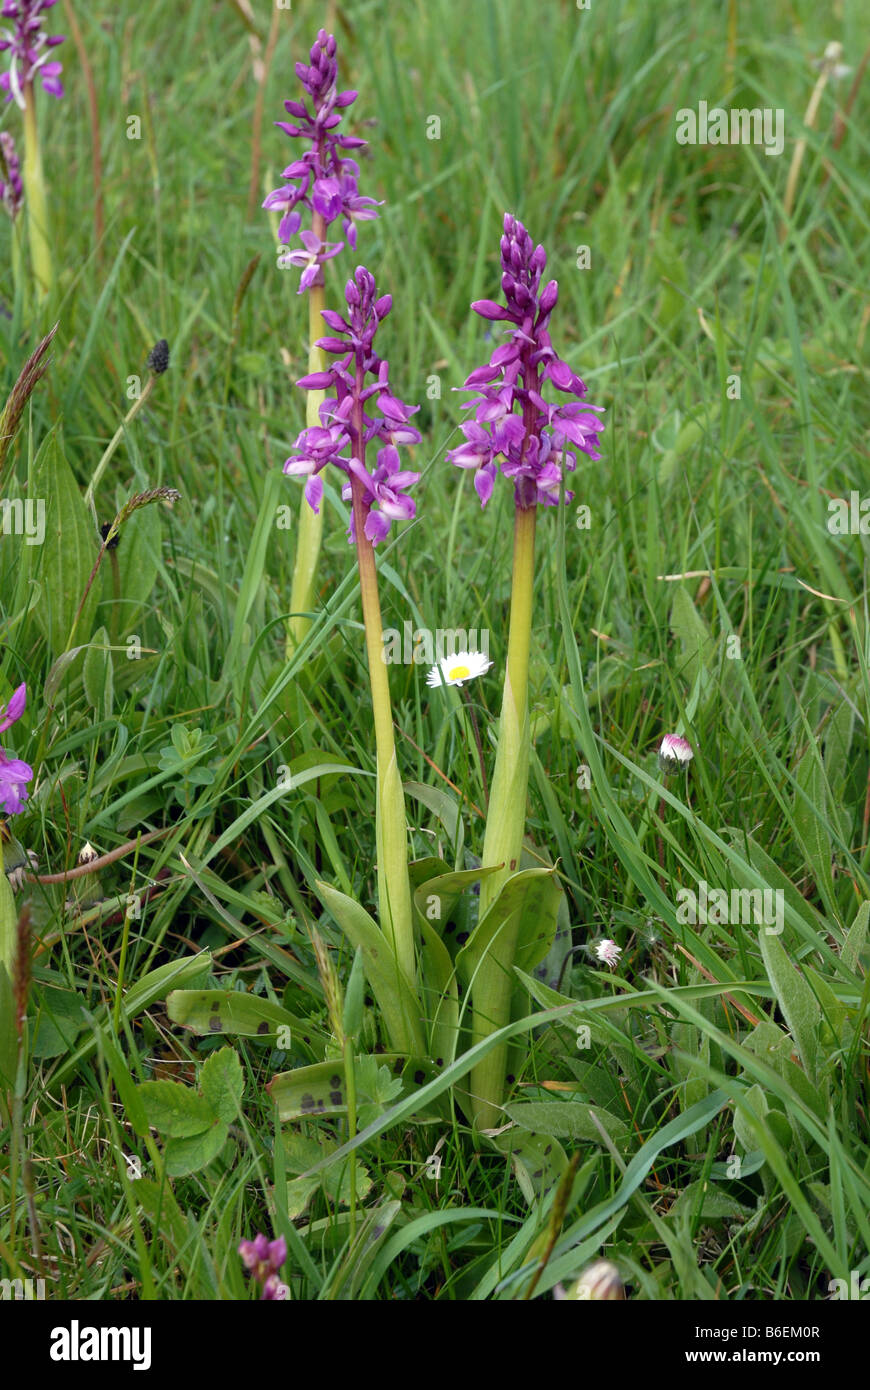 Early Purple Orchid on road verge Stock Photo